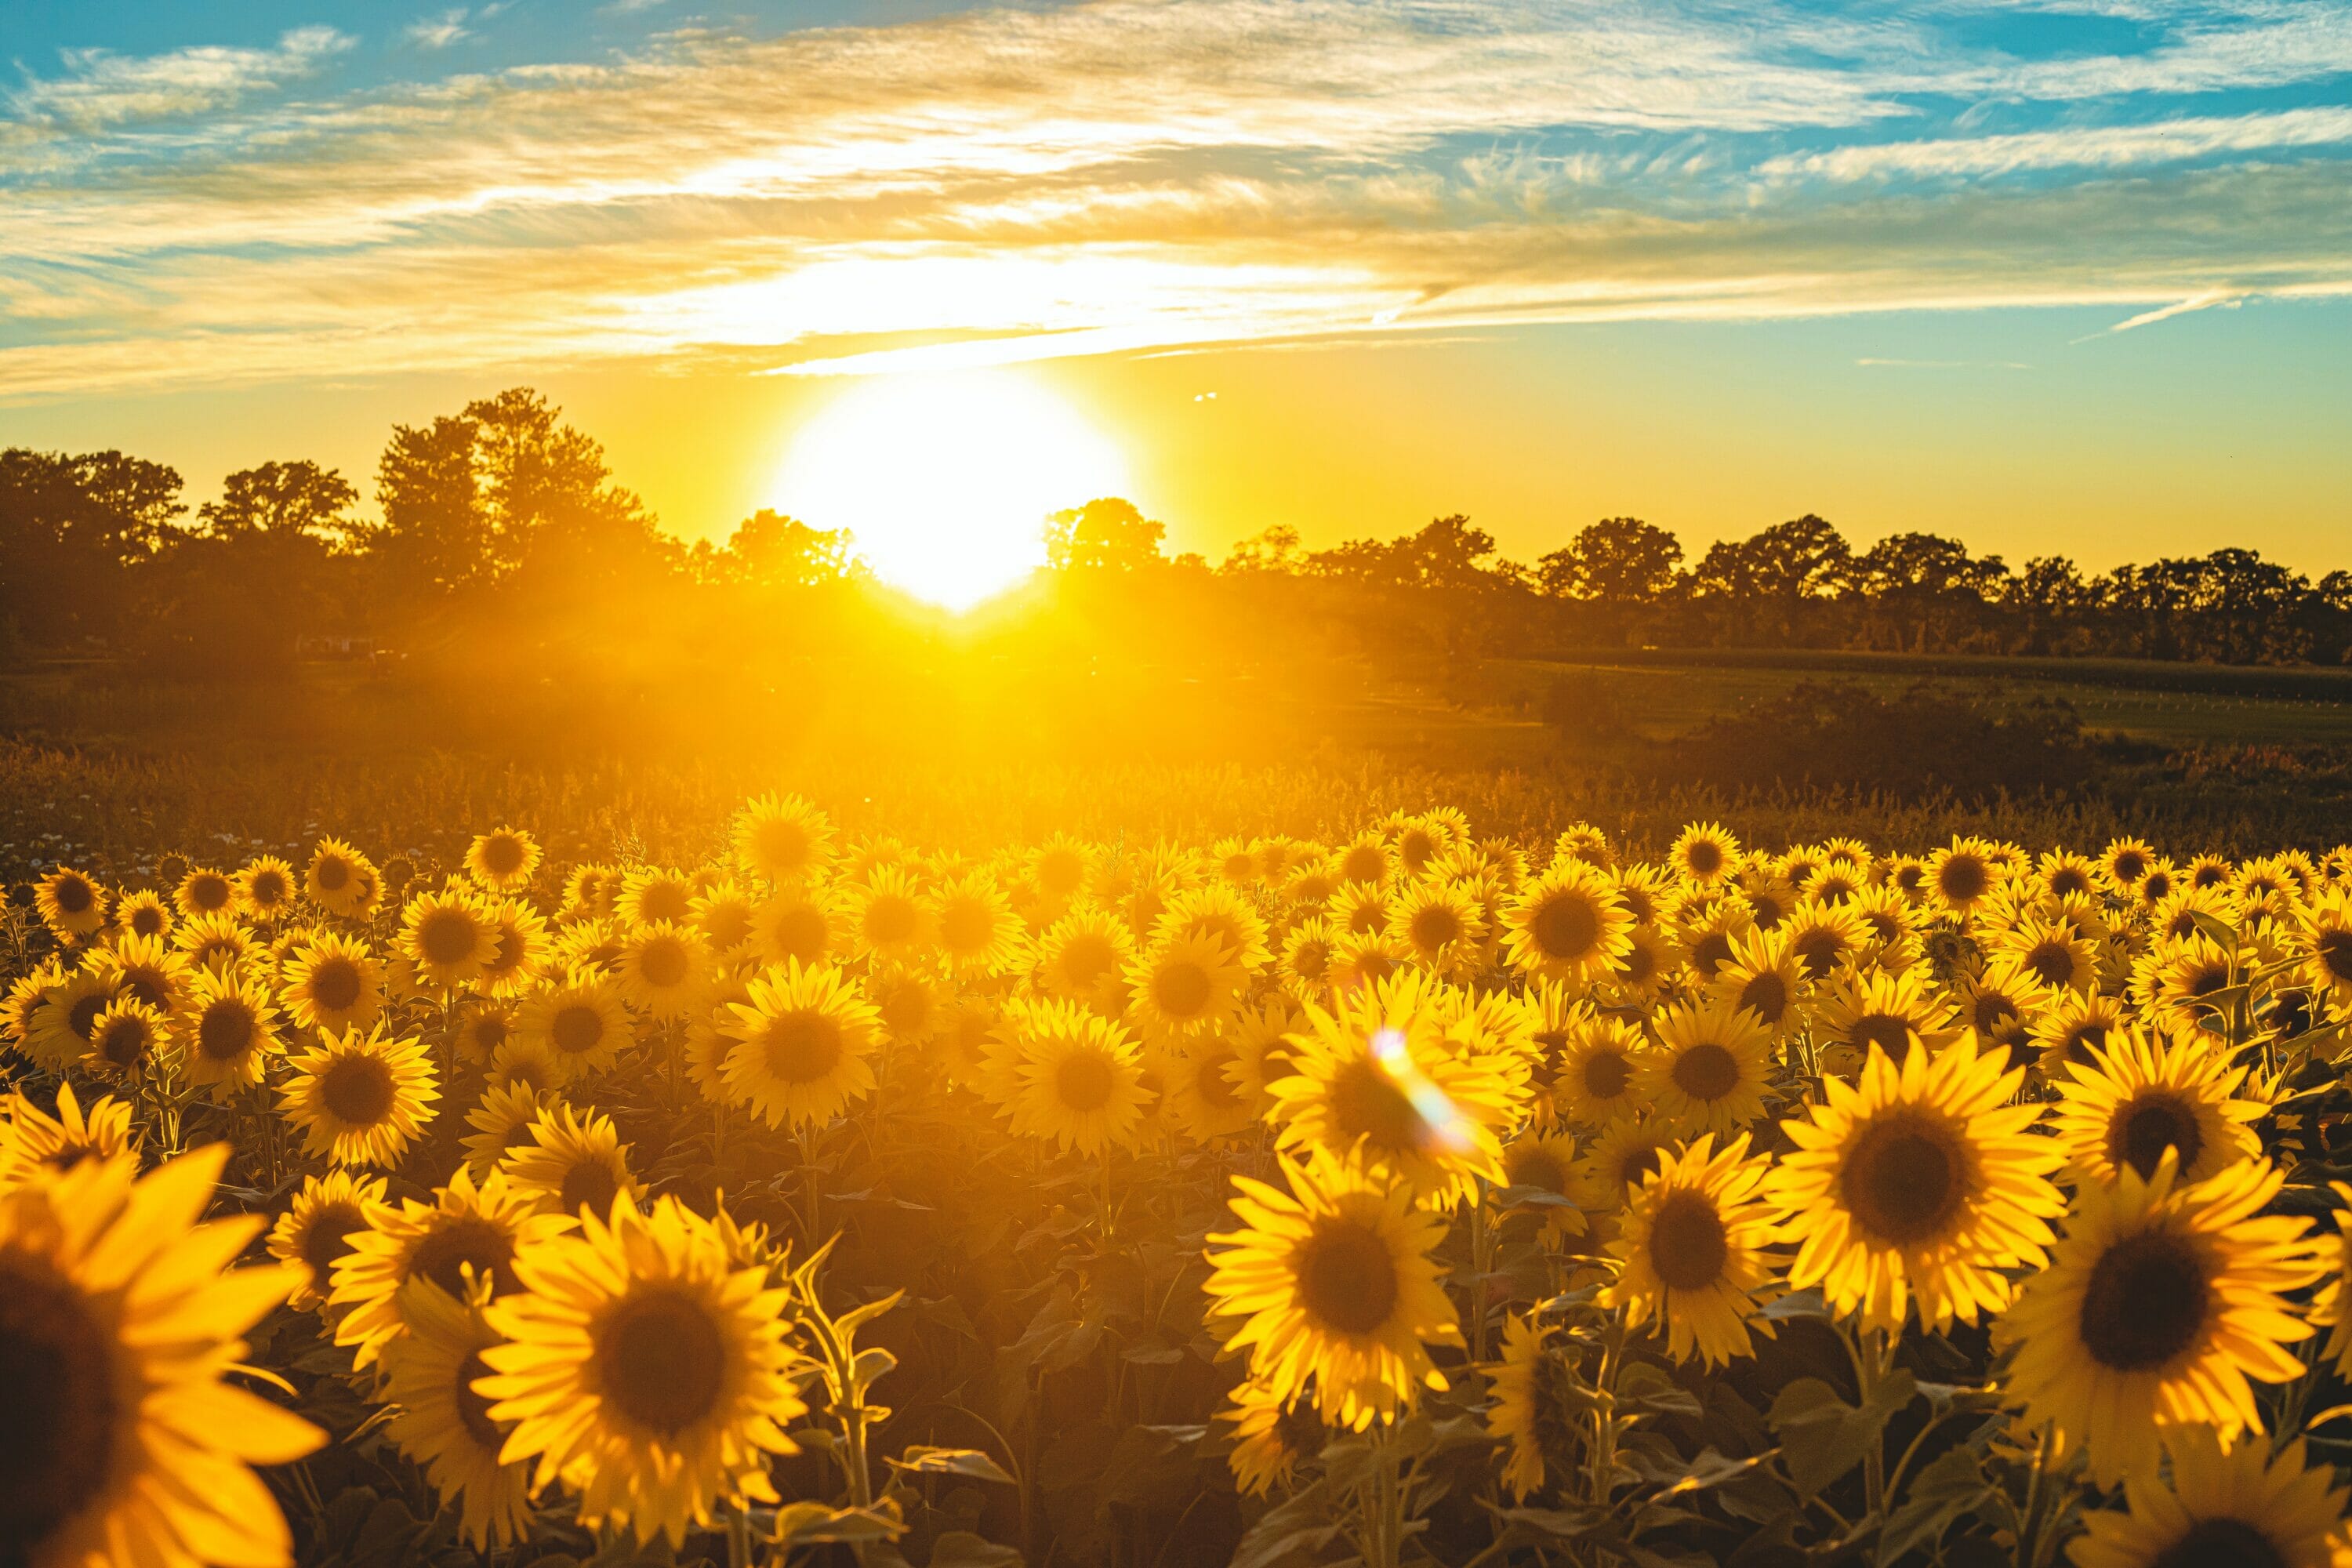 Sunset over Sunflowers in a field